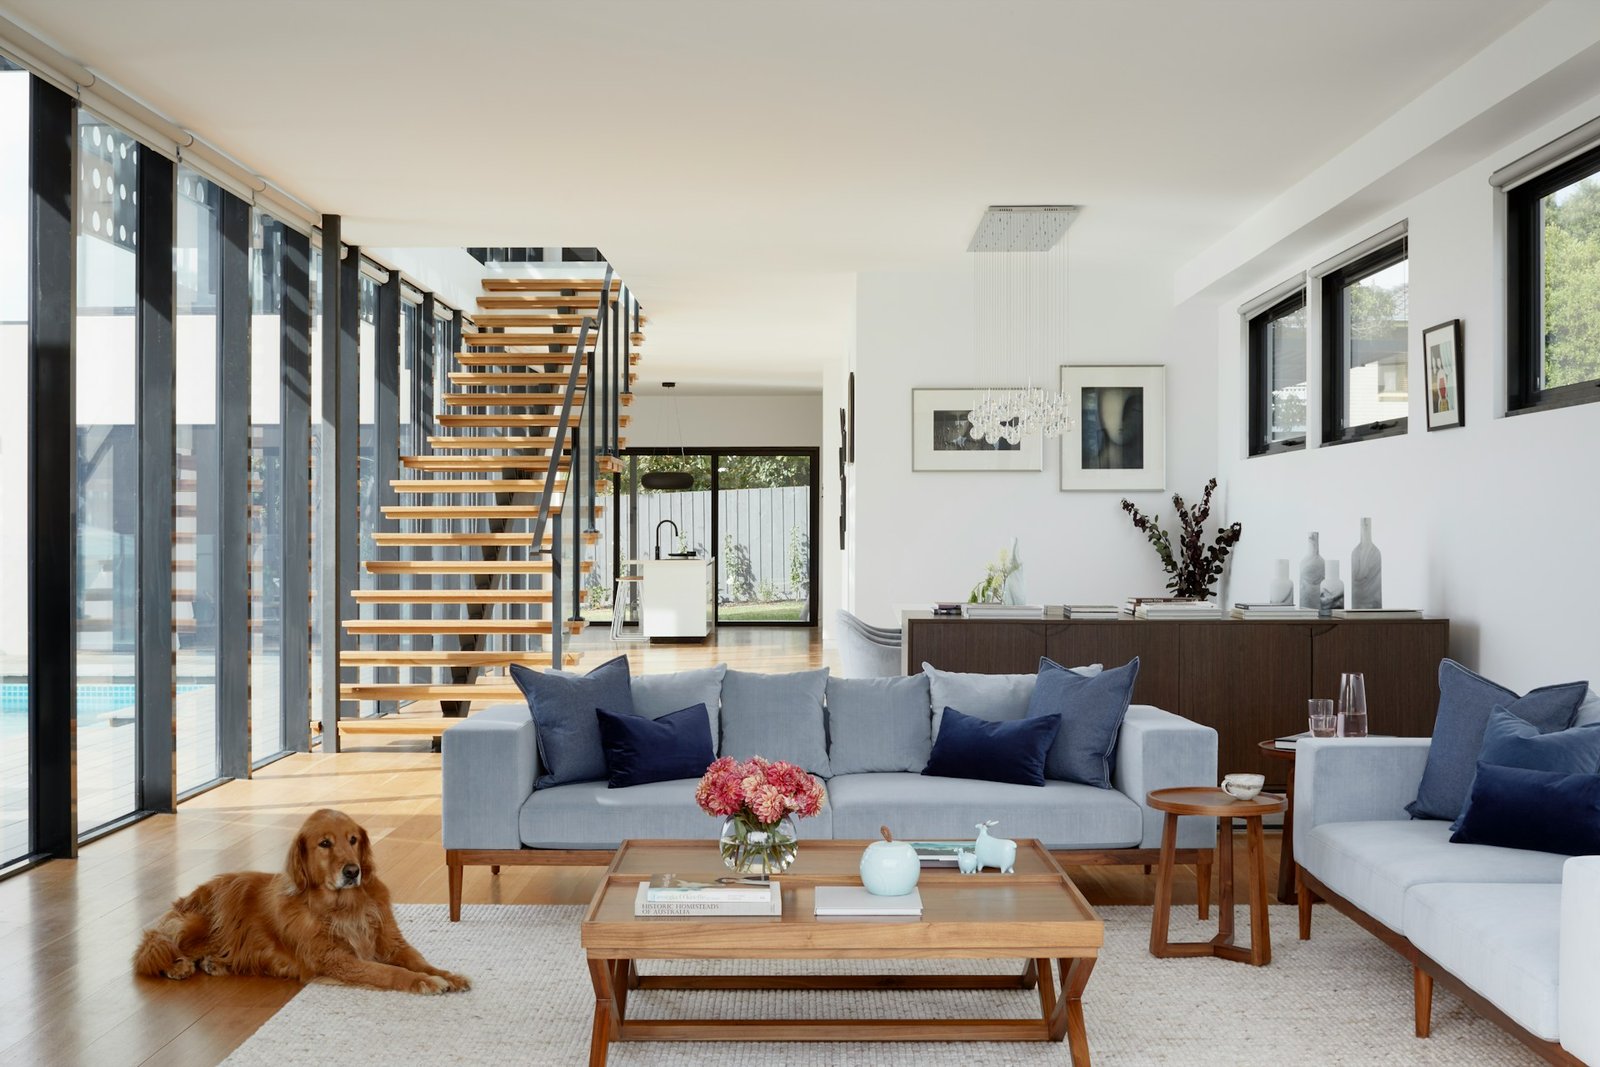 Modern loungeroom with wooden stairs leading up and golden retriever lying down